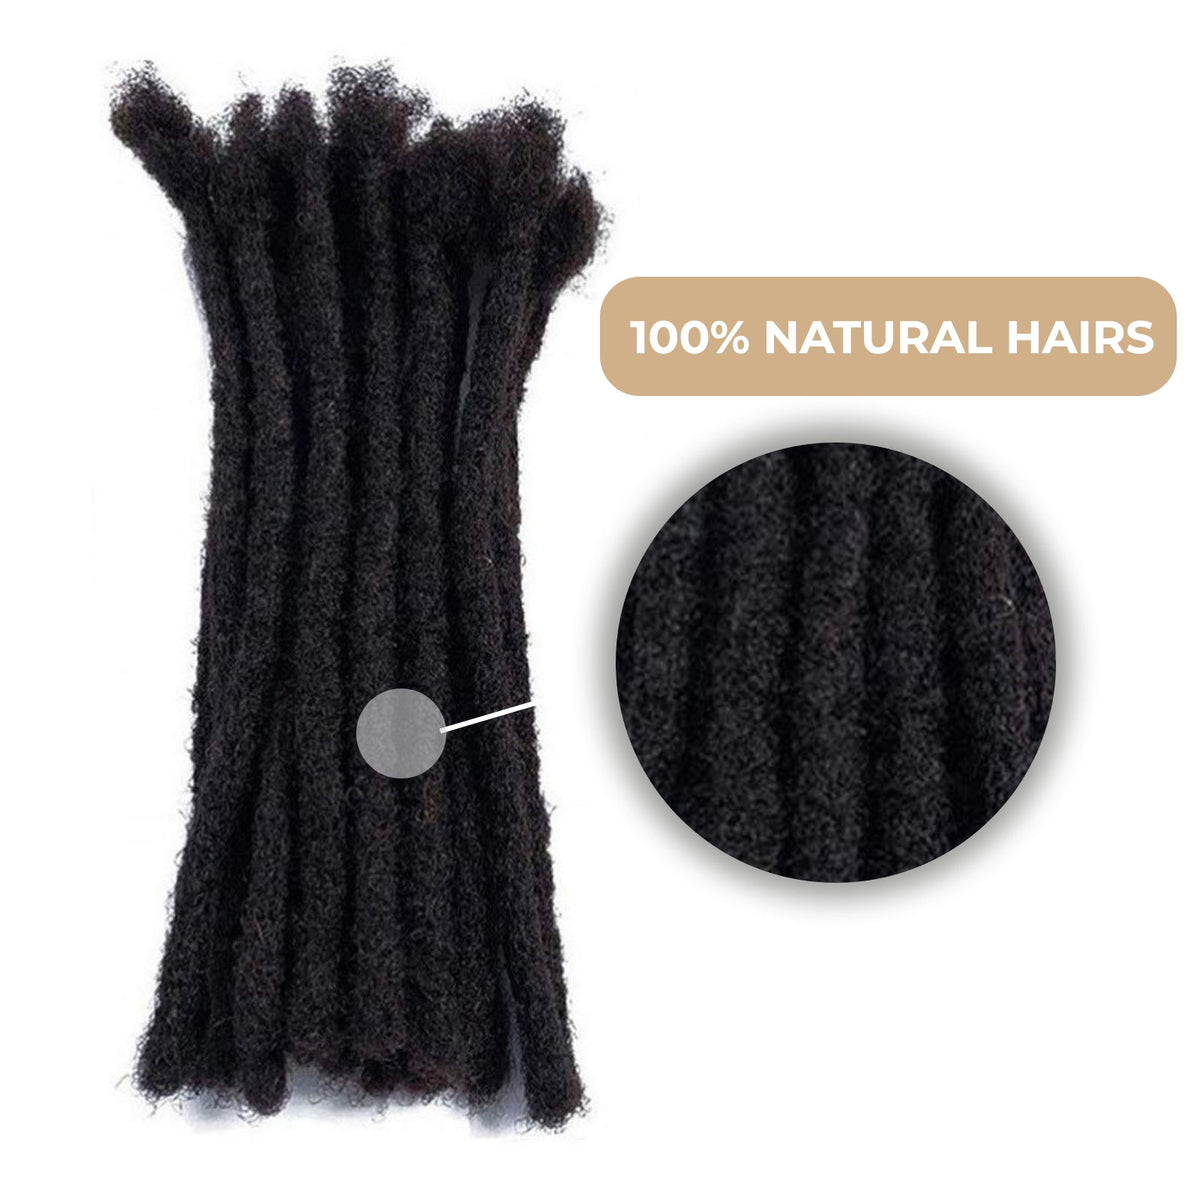 100% Human Hair Dreadlock Extensions 16Inch 10 Strands Handmade Natural Loc Extensions Human Hair Bundle Dreads Extensions For Woman&Men Can be Dyed & Bleached Natural Black 16inch length 0.4cm Width